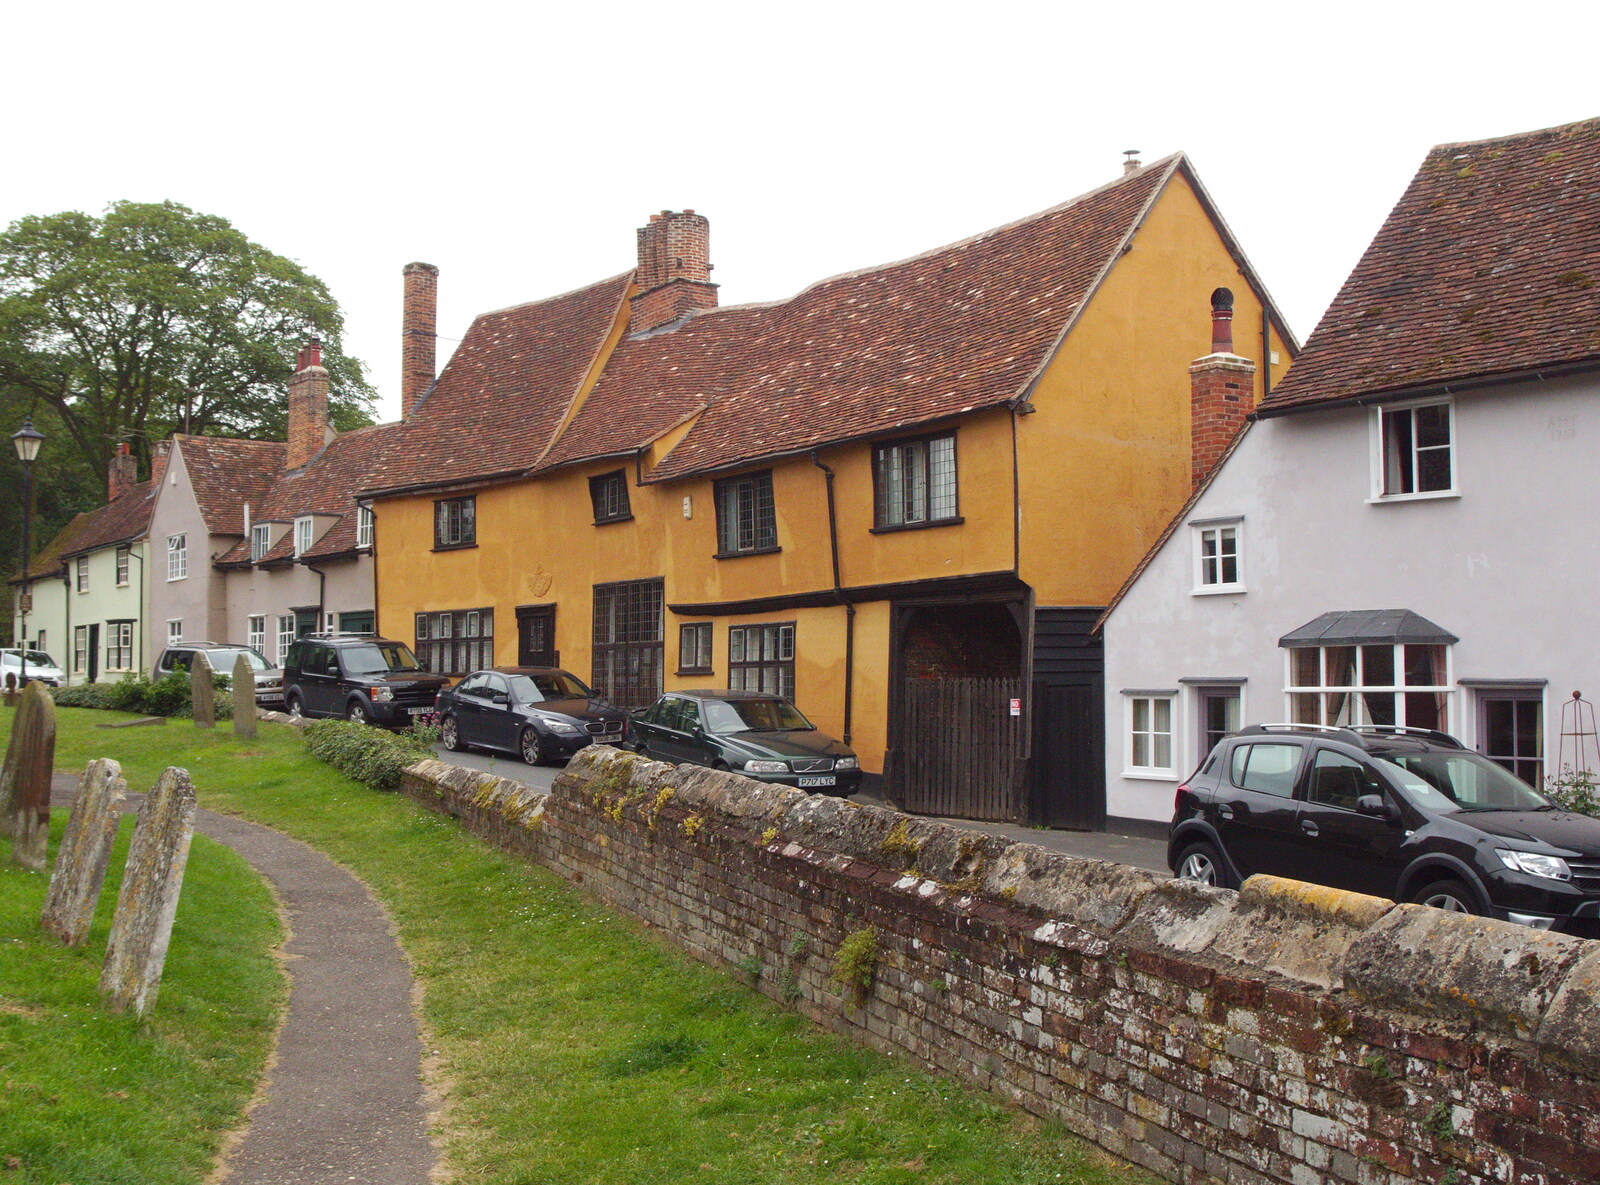 A Postcard from Boxford and BSCC at Pulham, Suffolk and Norfolk - 13th July 2019: Nice wonky houses in Boxford